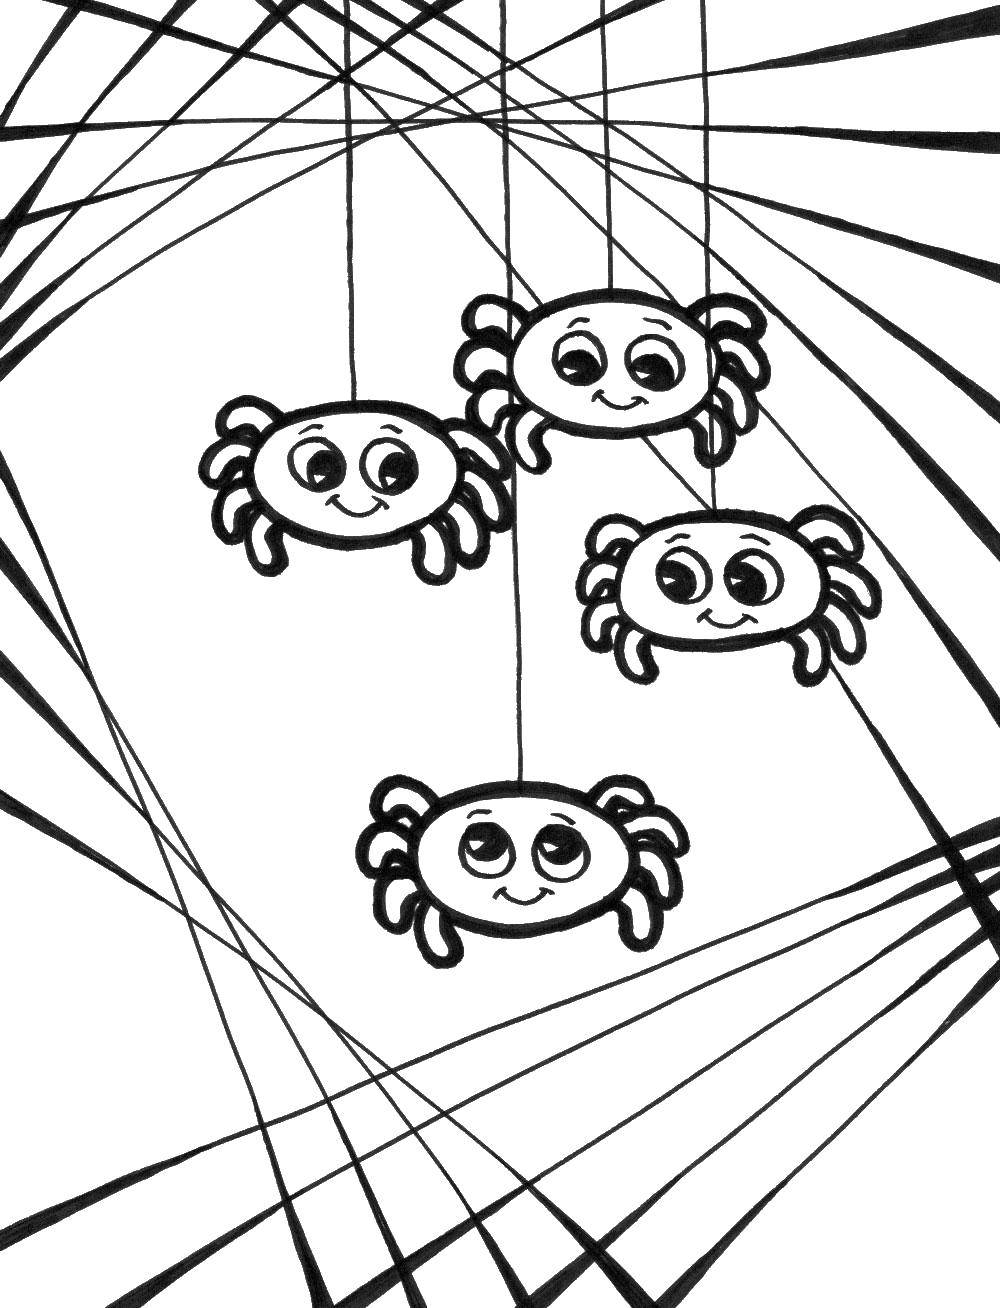 Coloring Spiders on the web. Category spiders. Tags:  spider, web, insect.